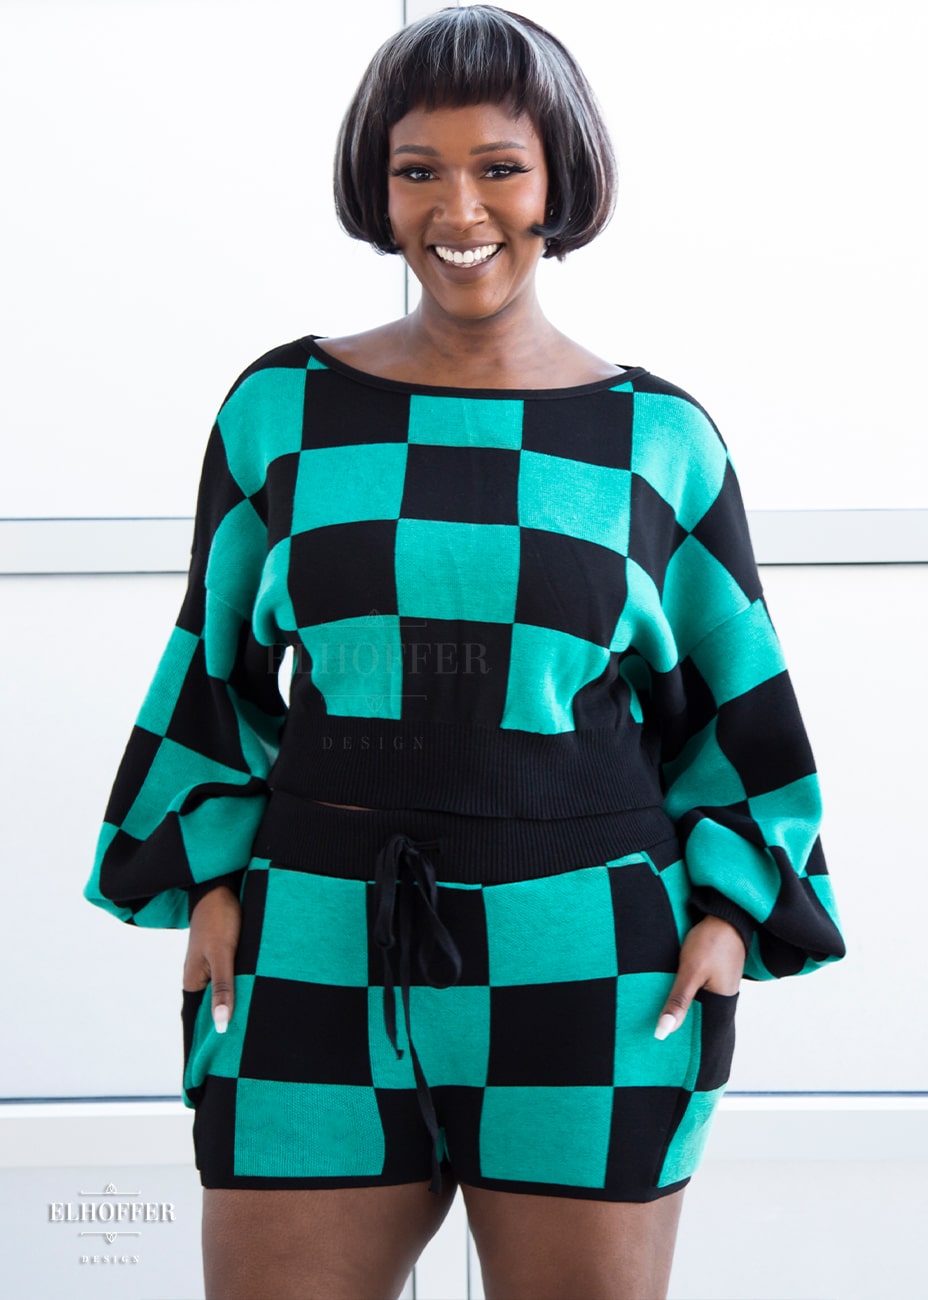 Lynsi, a medium dark skinned M model with short black and white hair, is smiling while wearing the XL/2XL sample of a cropped oversize sweater with black and green chessboard pattern and long billowing sleeves. She would normally wear the M/L. She paired them with matching shorts. Note: the matching shorts are a sample and not included nor available at this time.